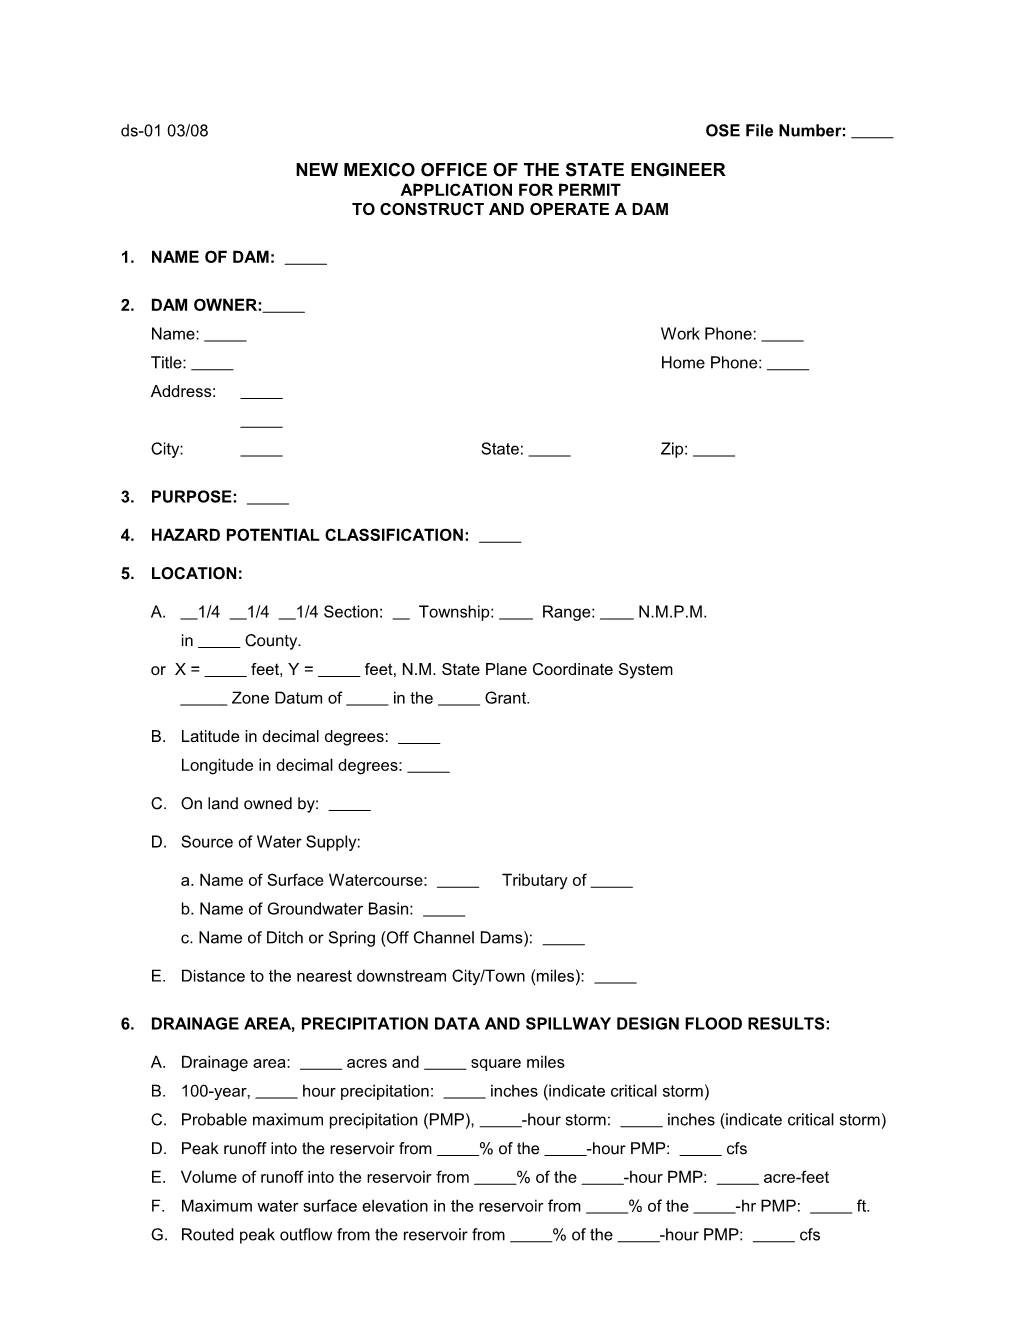 Application for Permit to Construction and Operate a Dam